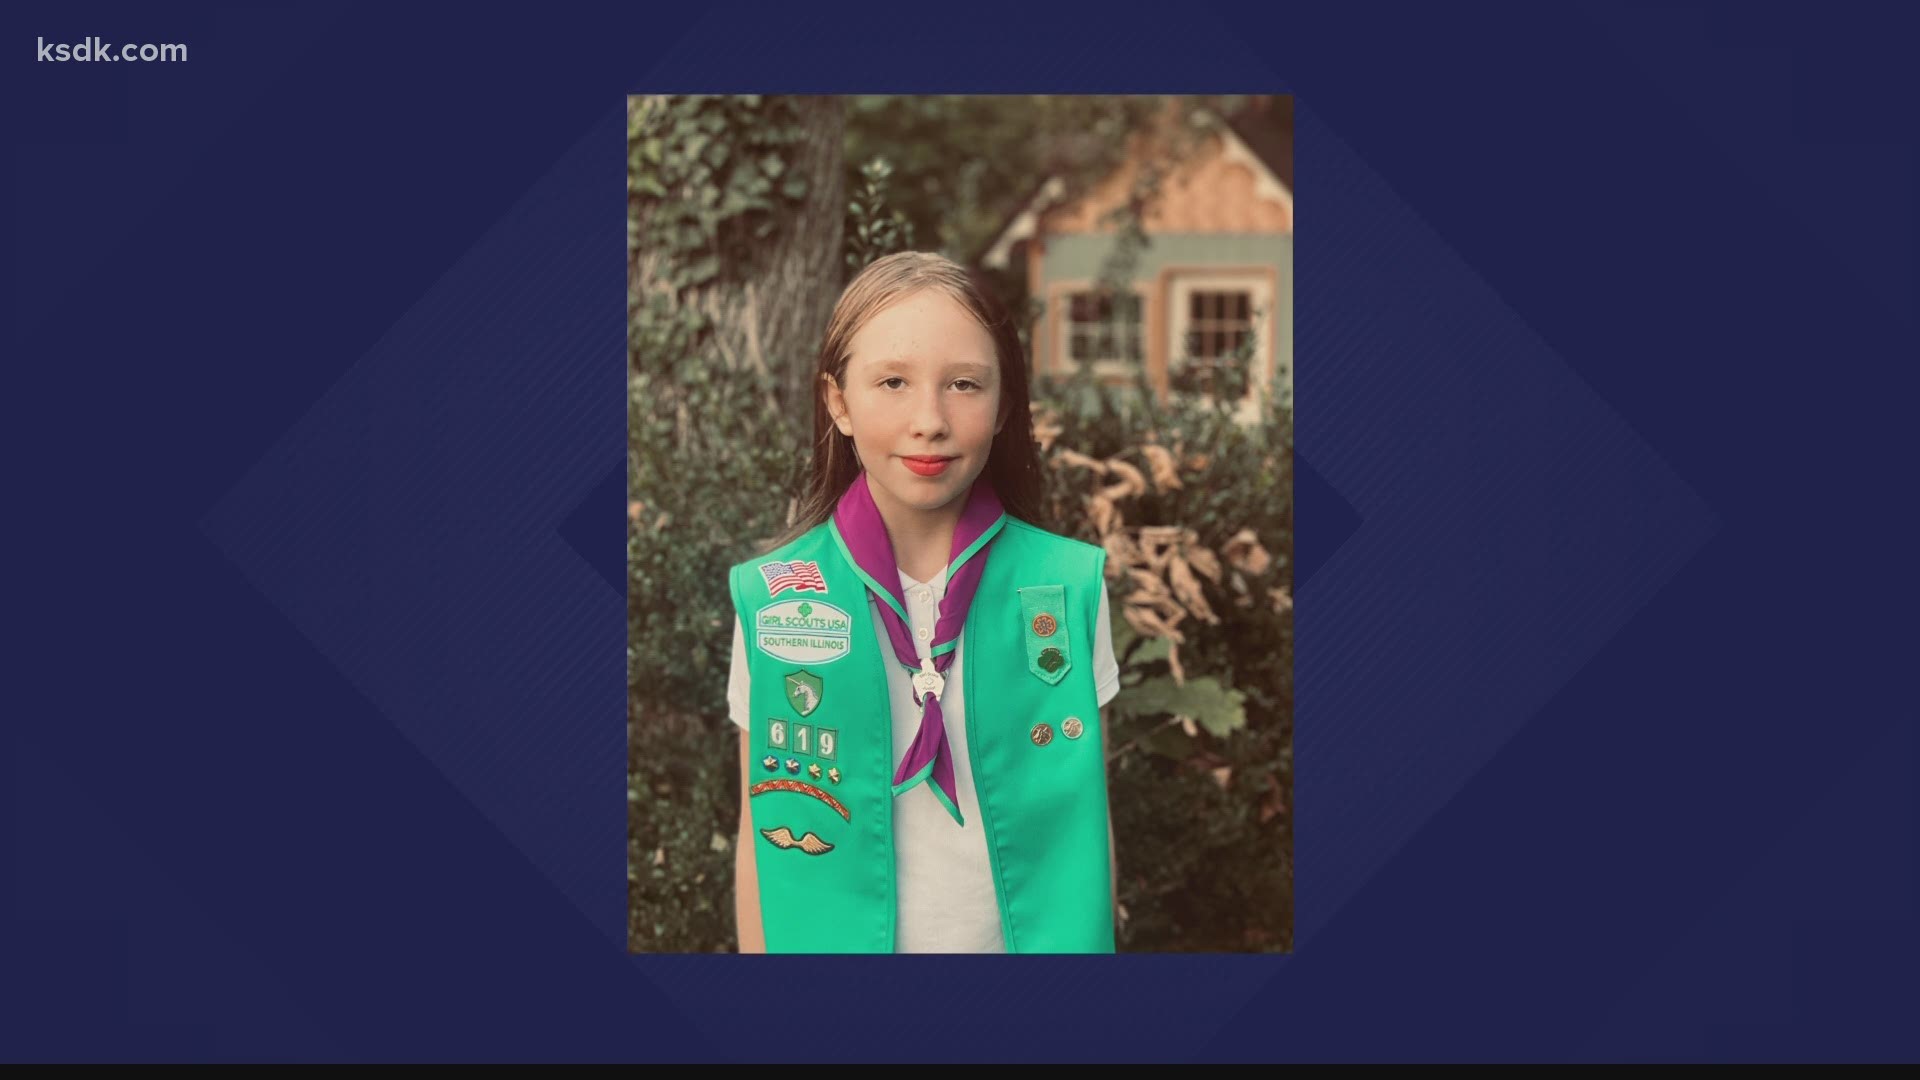 An O'Fallon, Illinois, girl received the highest honor from the Girl Scouts for her quick actions that helped save a man's life last fall.